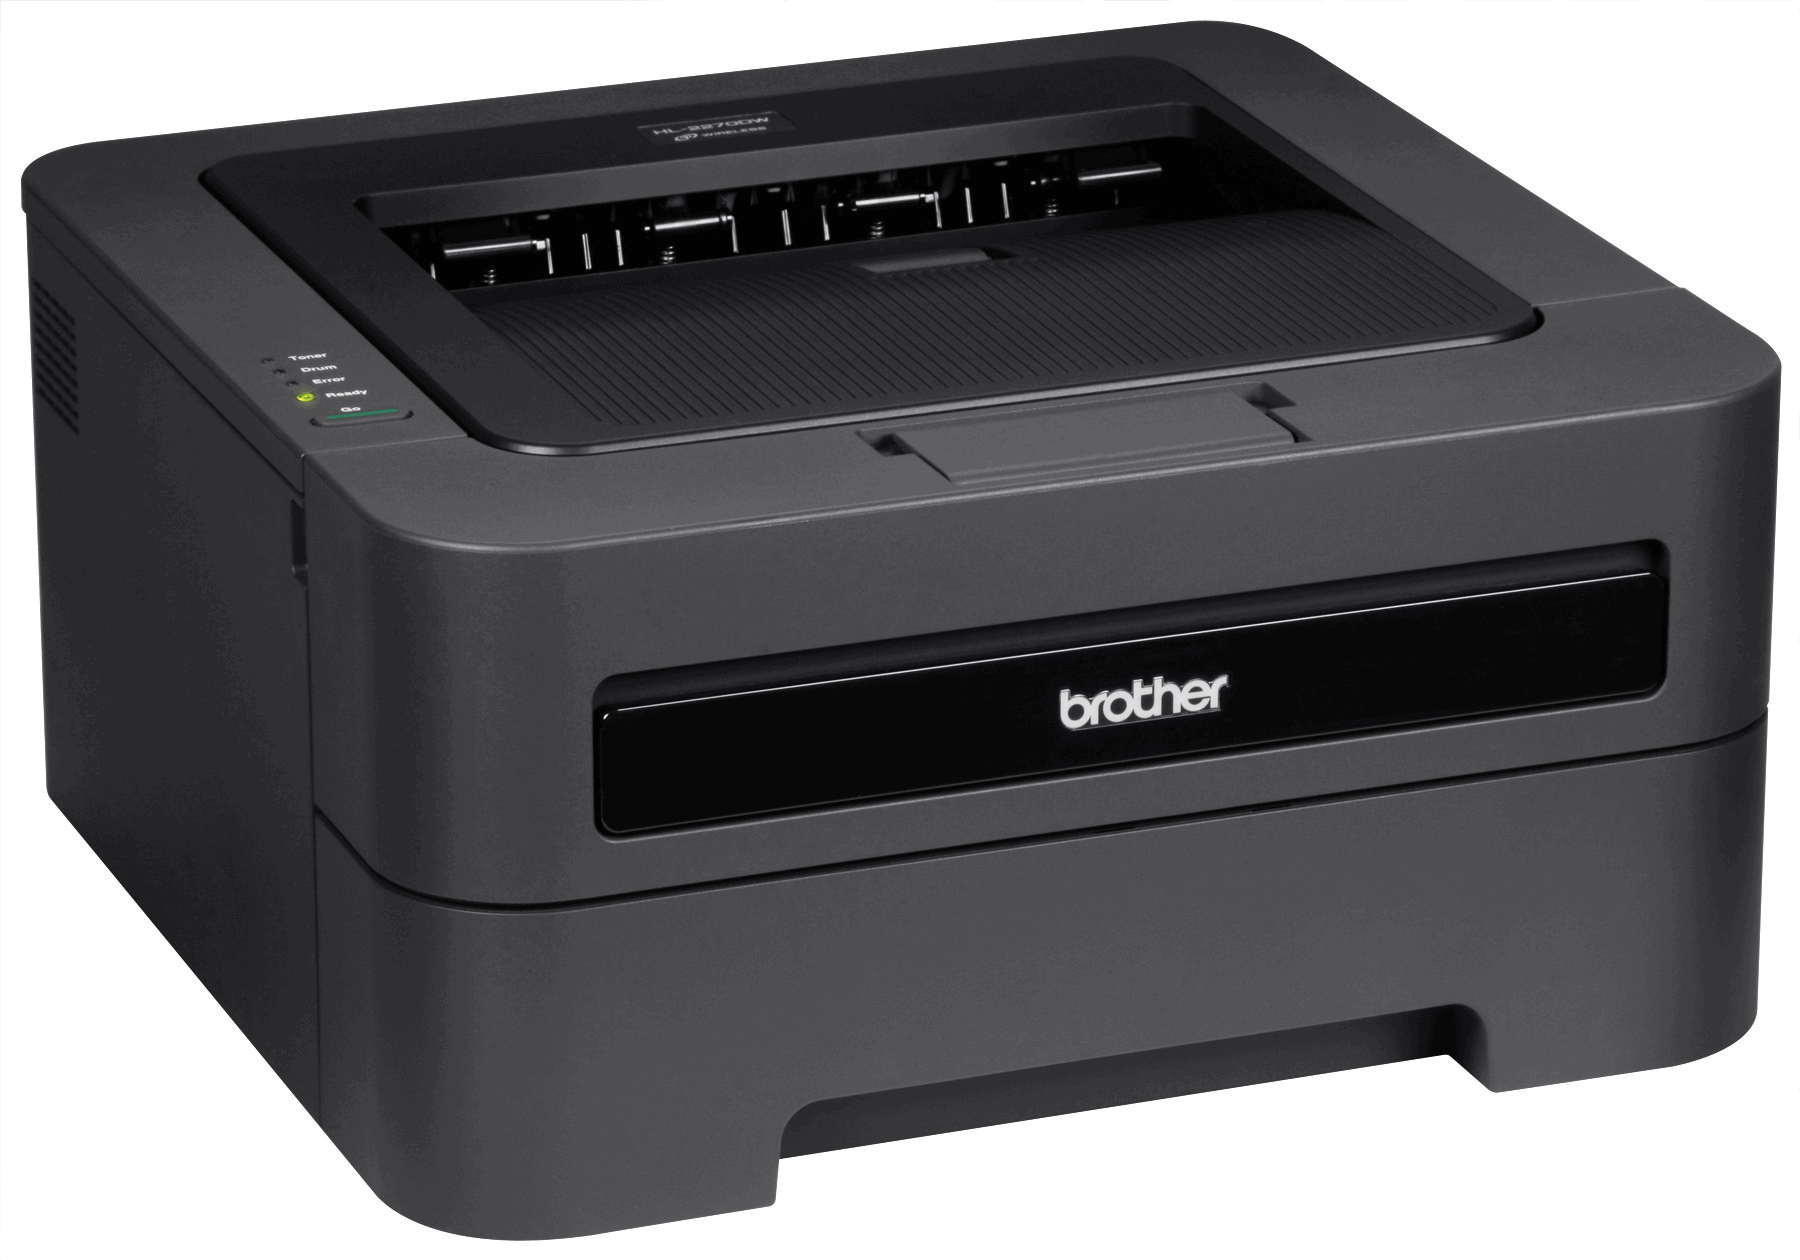 SPONSORED: Brother Laser/LED Printer Buyers Guide